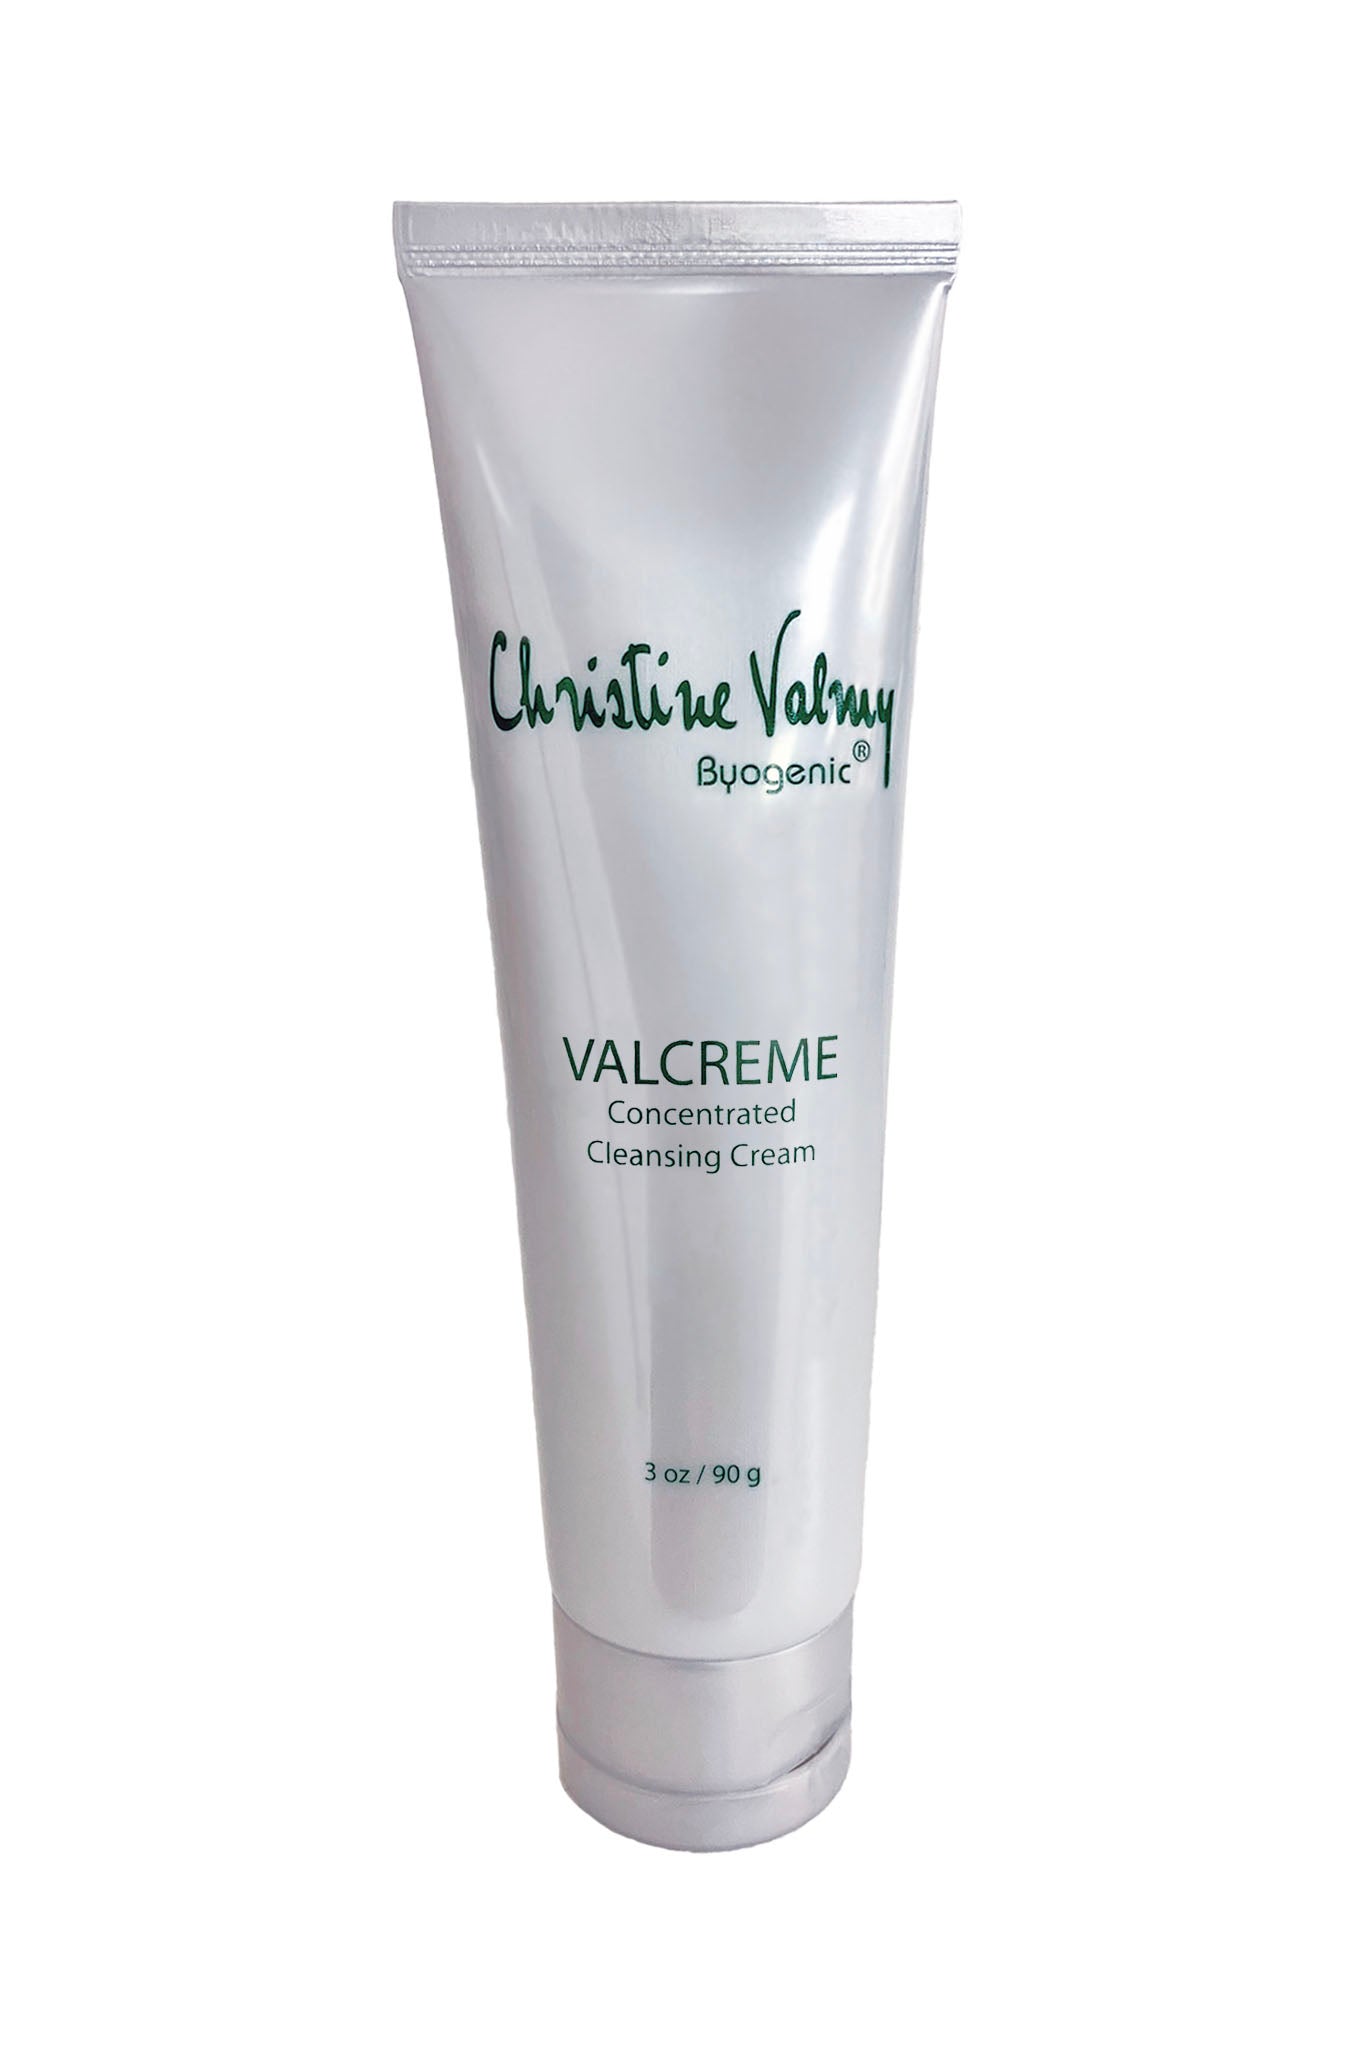 Christine Valmy Valcreme Concentrated Cleansing Cream, for normal, dry or dehydrated skin.